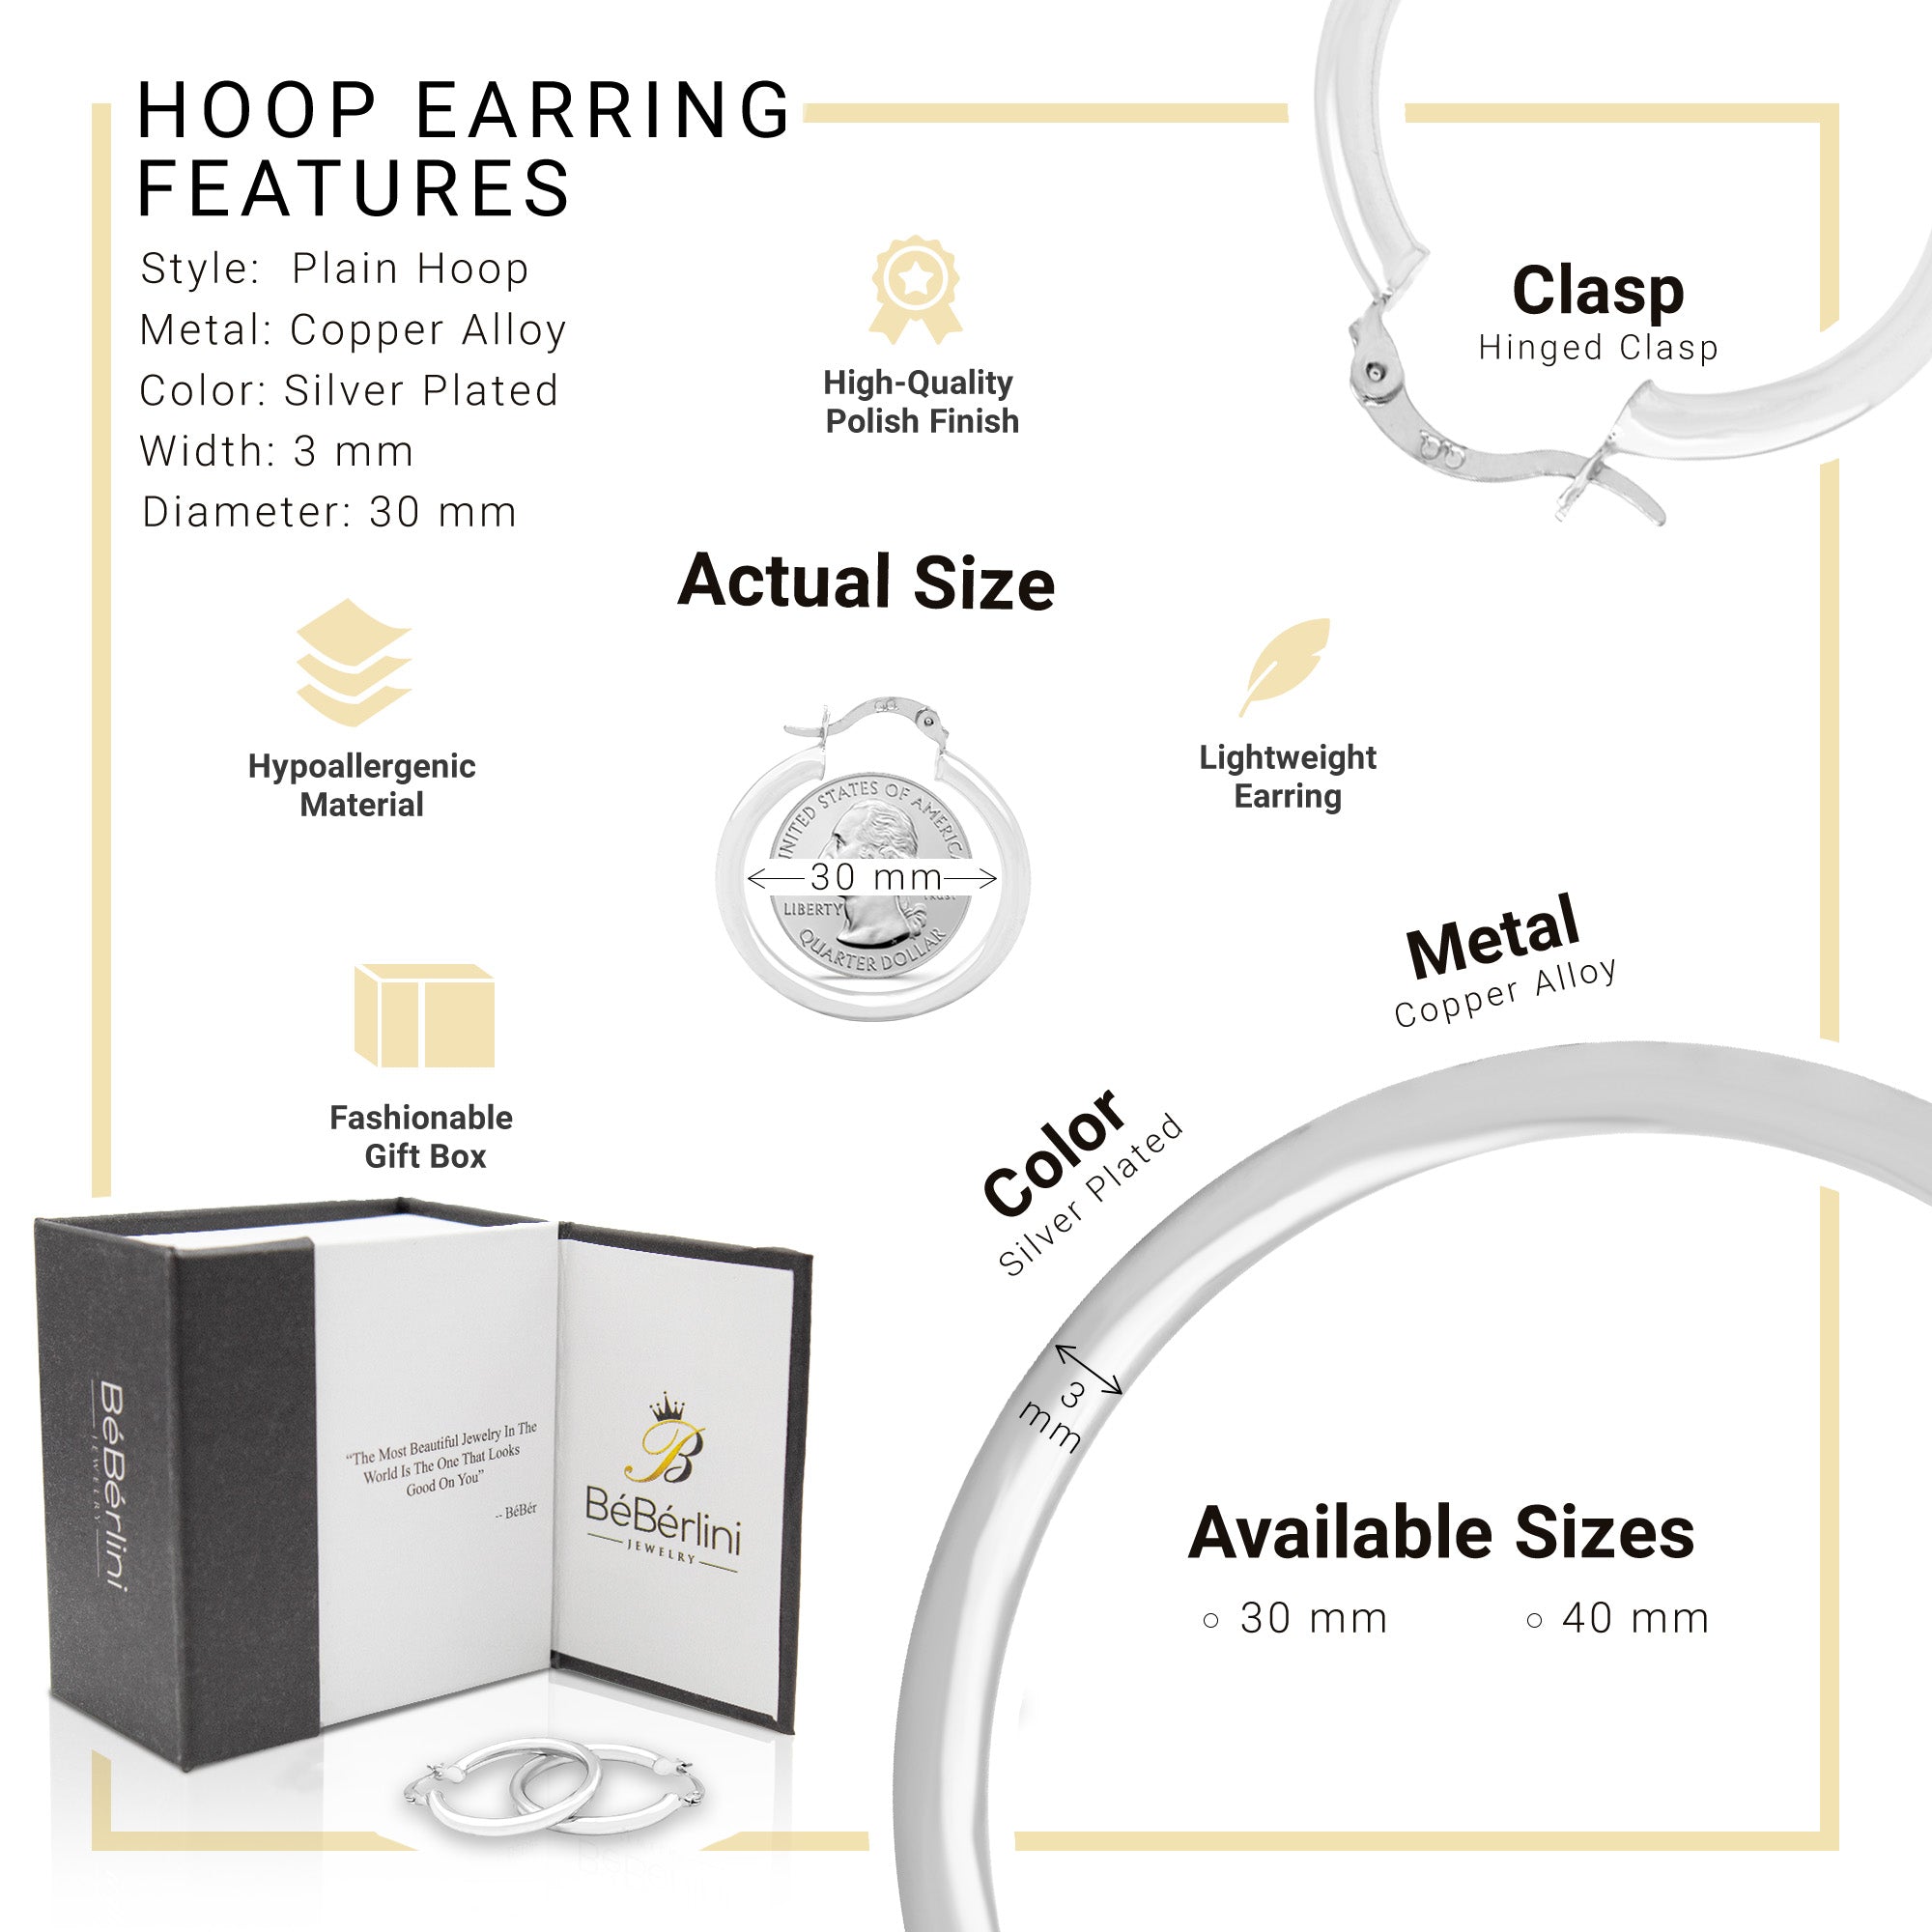 Round Hoops Features